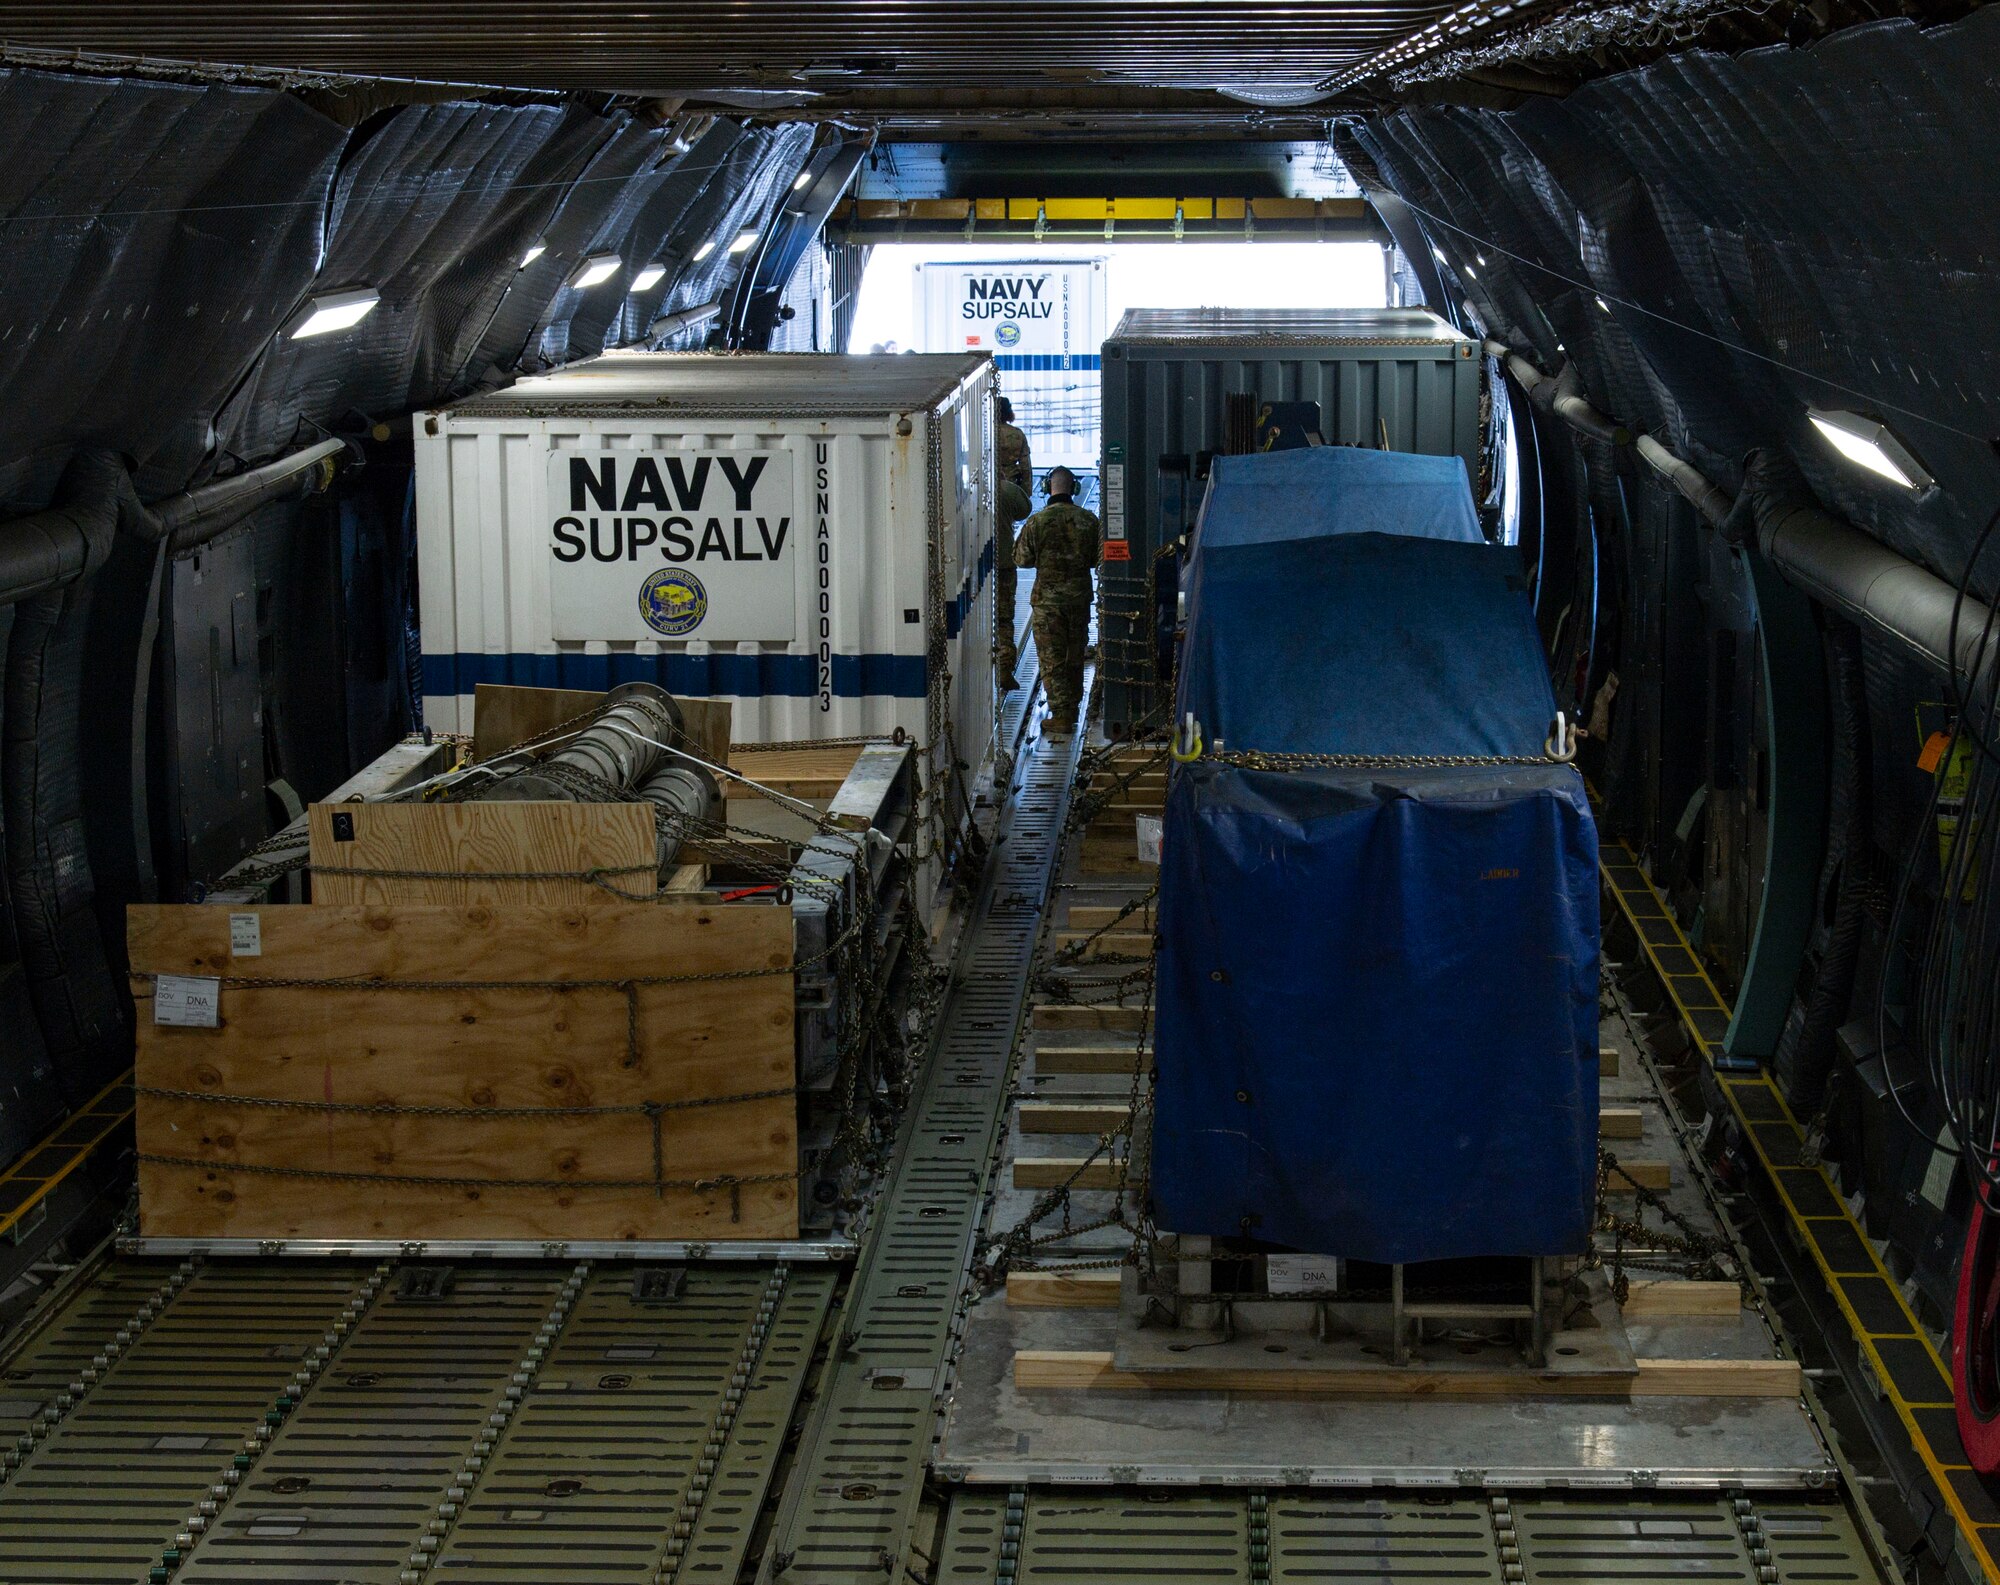 U.S. Navy Supervisor of Salvage and Diving (SUPSALV) cargo sits in the cargo compartment of a C-5M Super Galaxy at Dover Air Force Base, Delaware, Feb. 8, 2022. Loadmasters from the 9th Airlift Squadron along with 436th Aerial Port Squadron ramp services personnel, loaded the cargo for transport in support of Naval Sea Systems Command. (U.S. Air Force photo by Roland Balik)